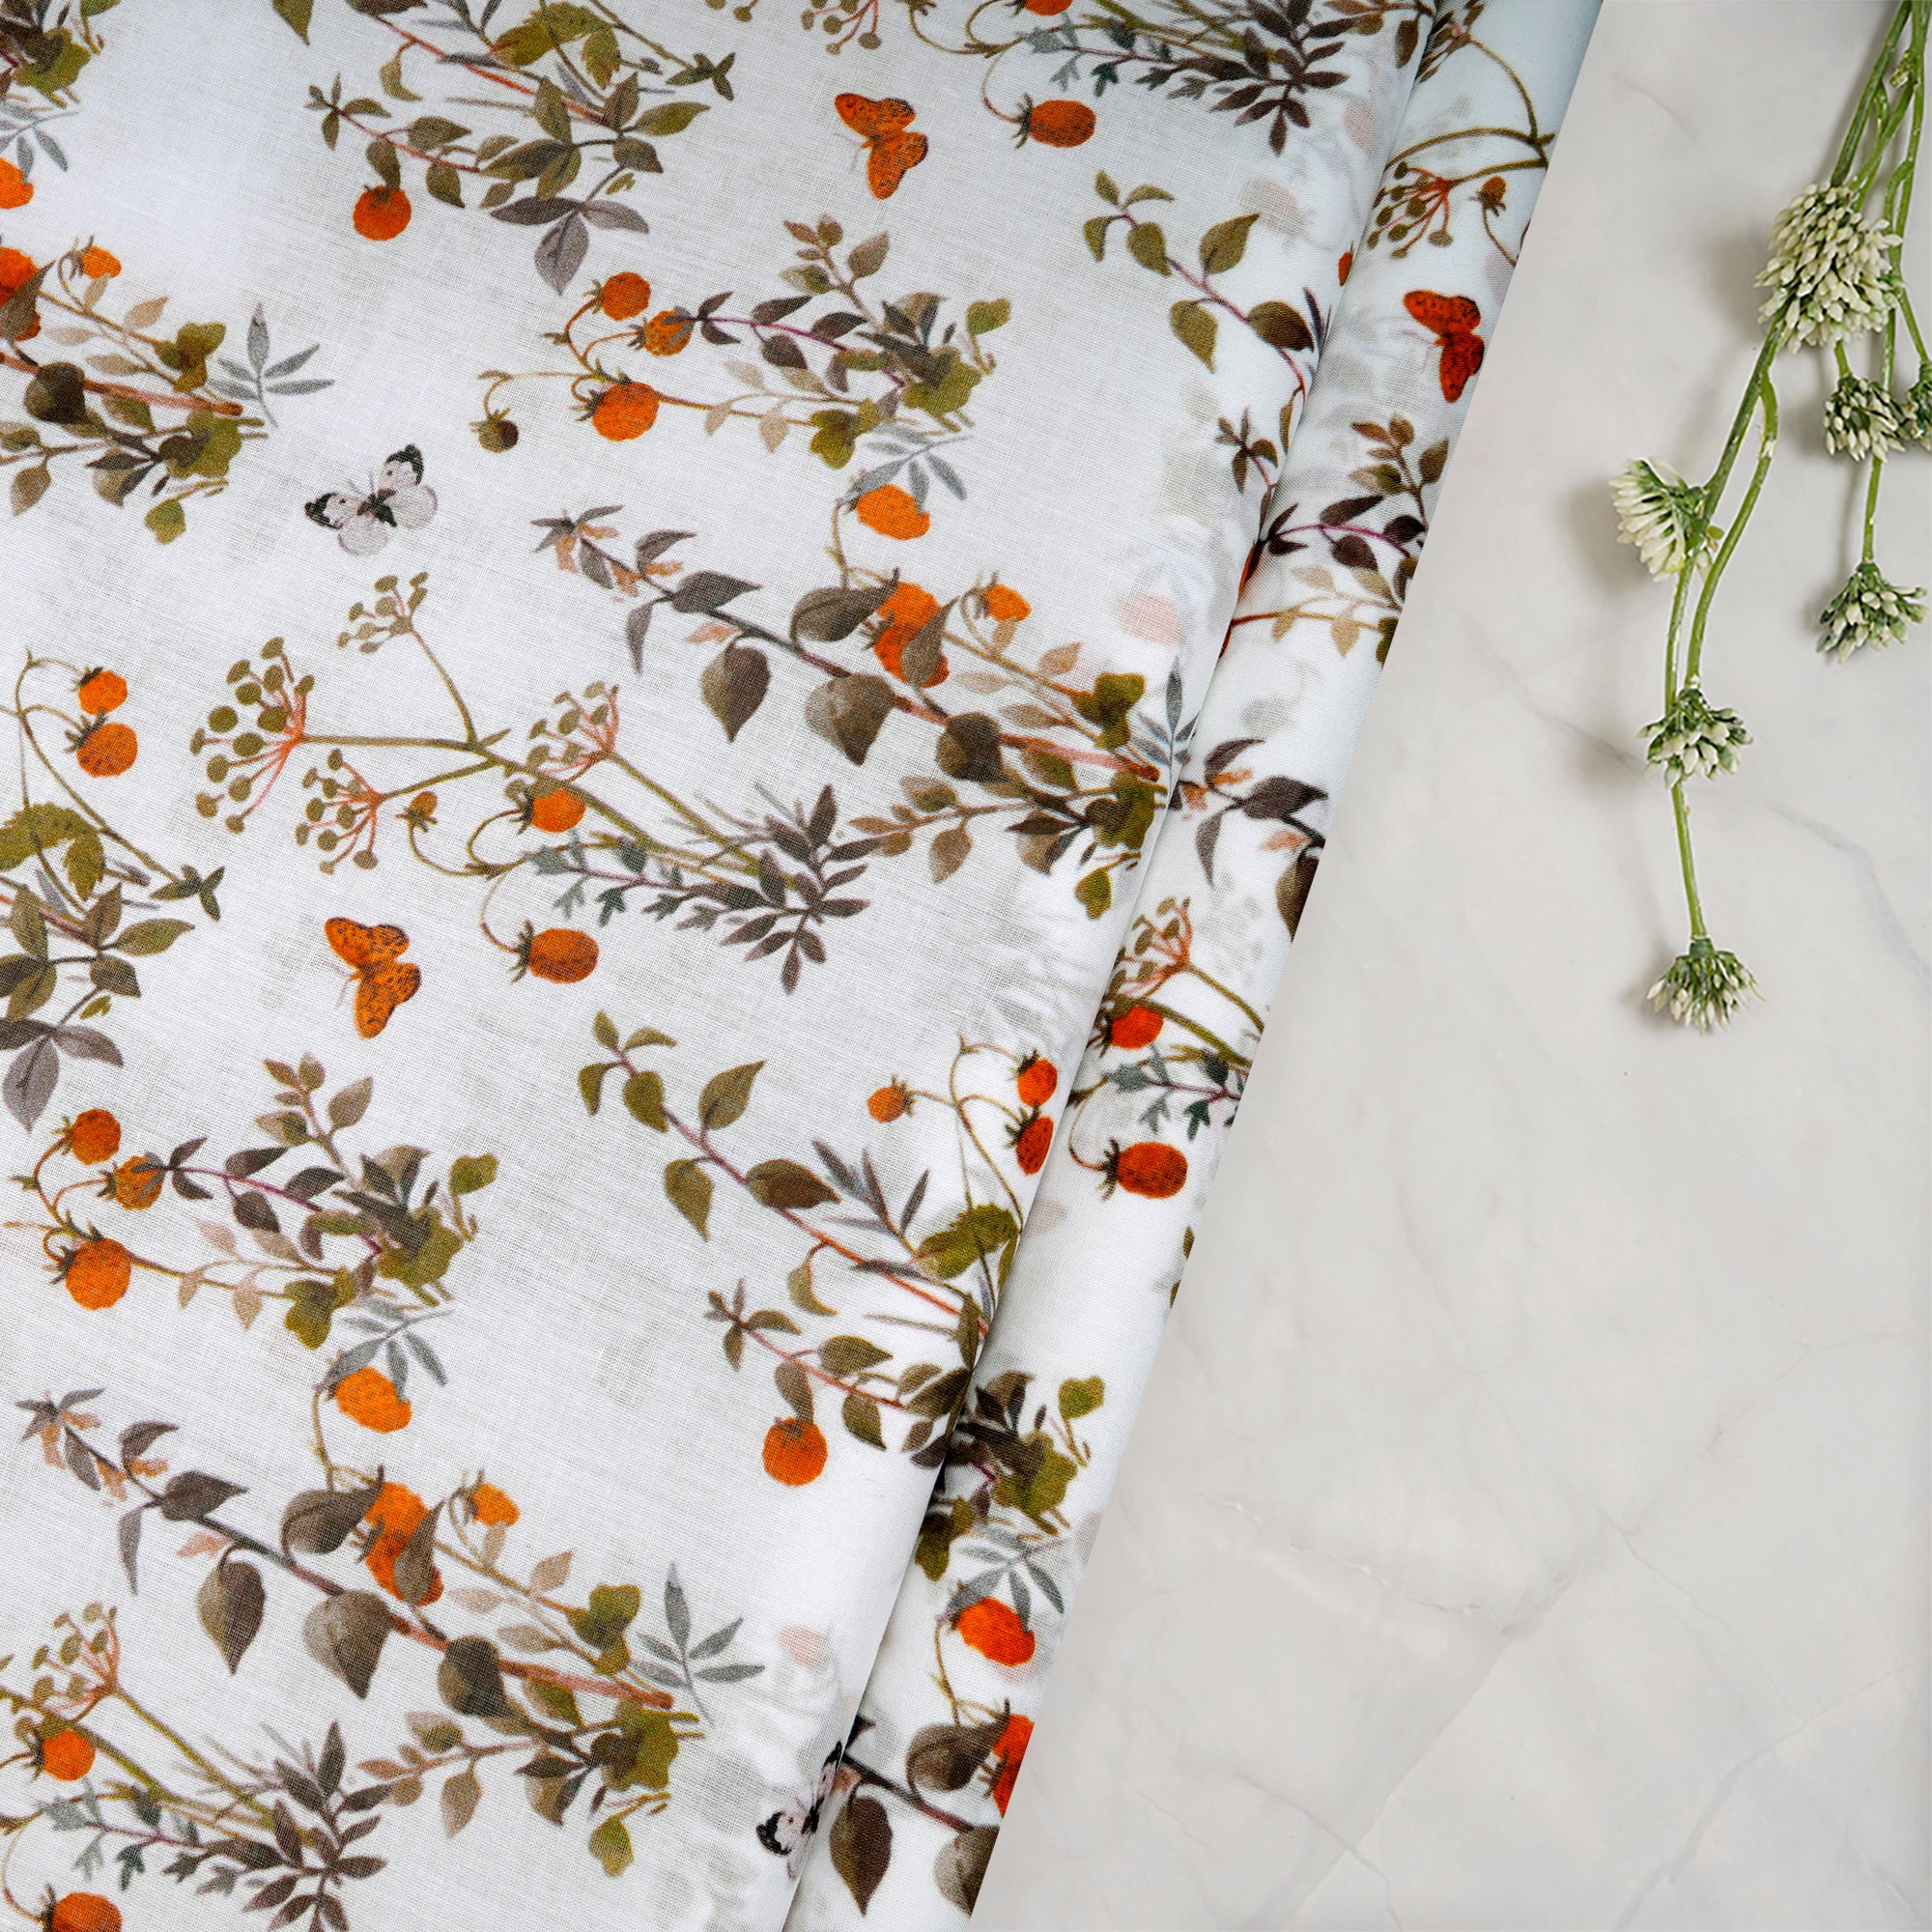 Off-White Floral Pattern Digital Print Voile Cotton Fabric